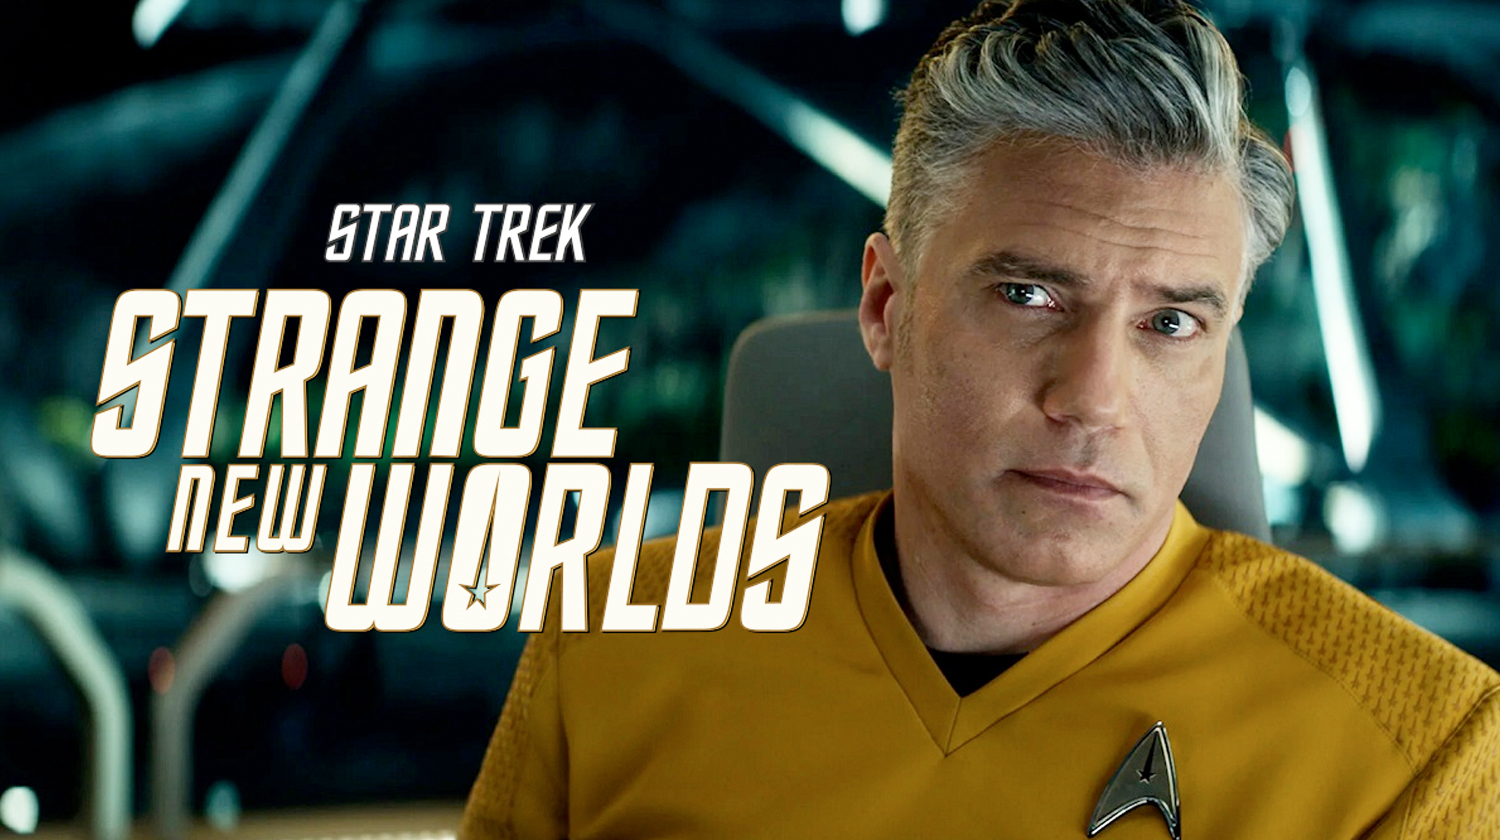 Strange New Worlds is most watched Star Trek show on Paramount Plus | Space